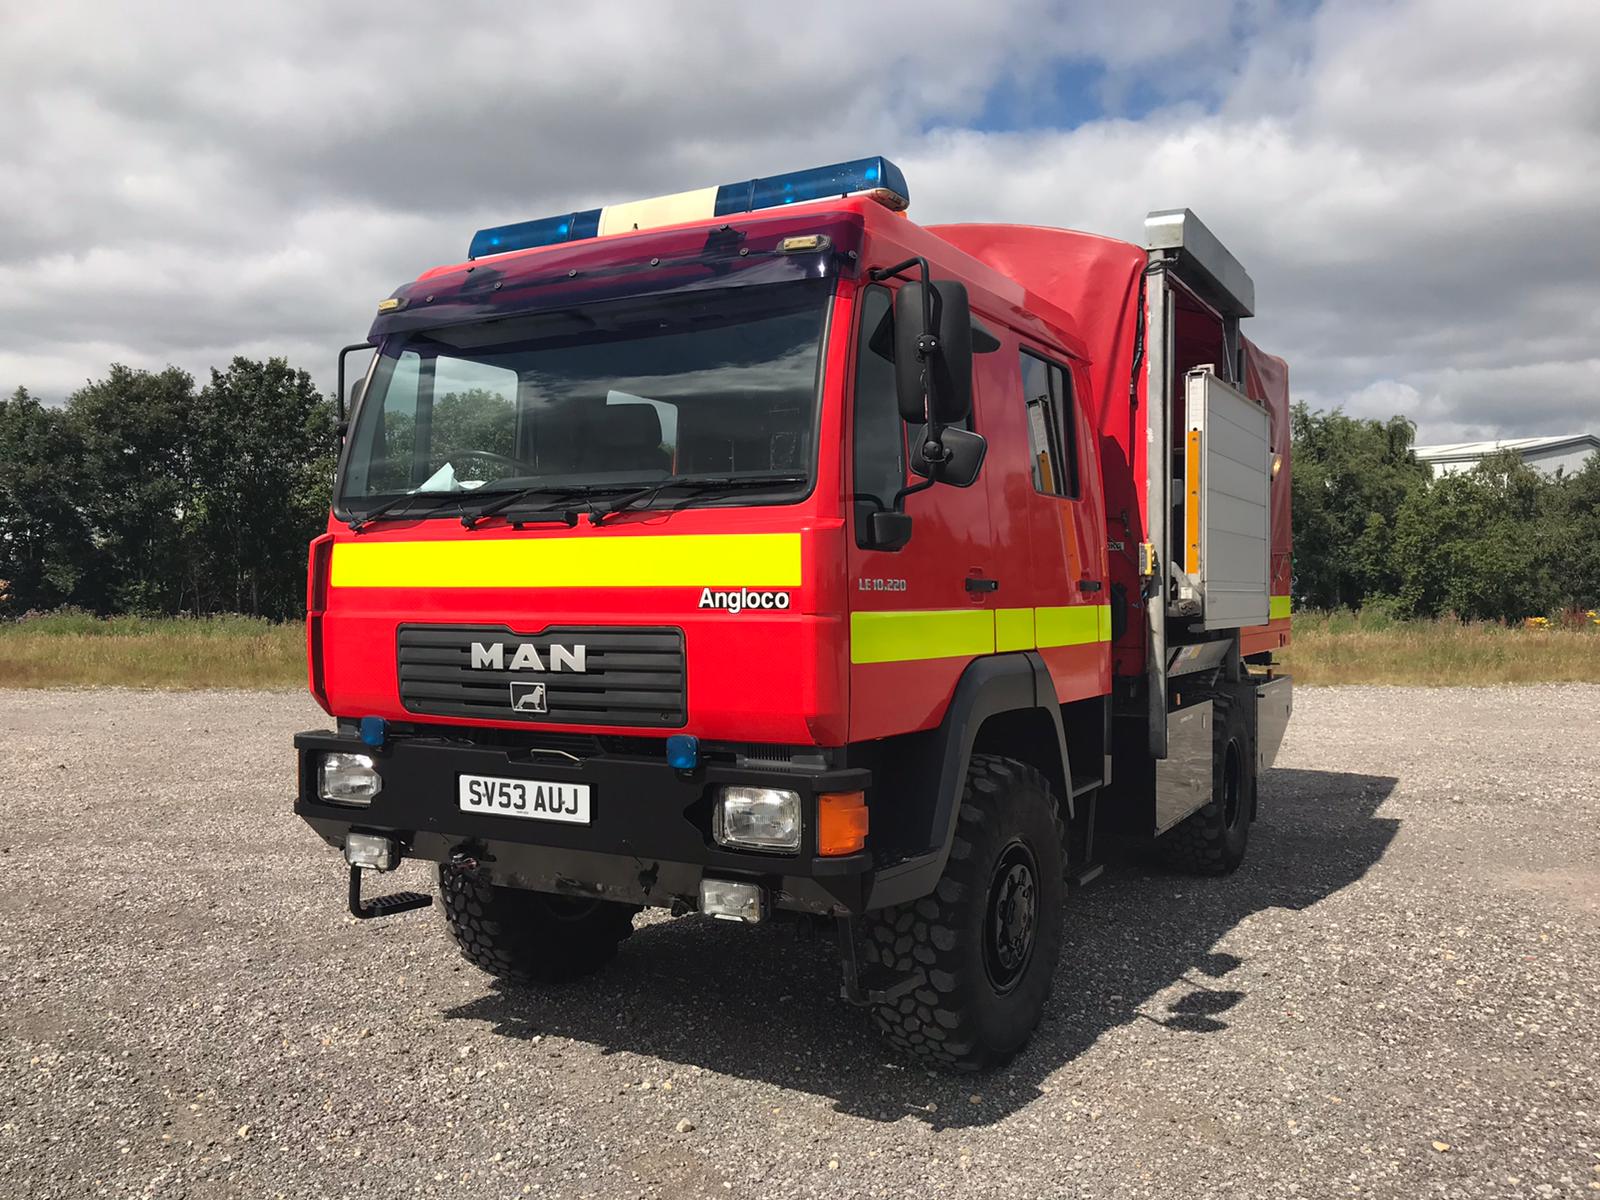 M.A.N 4x4 Crew Cab Hose Layer - Evems Limited - Good quality fire engines for sale